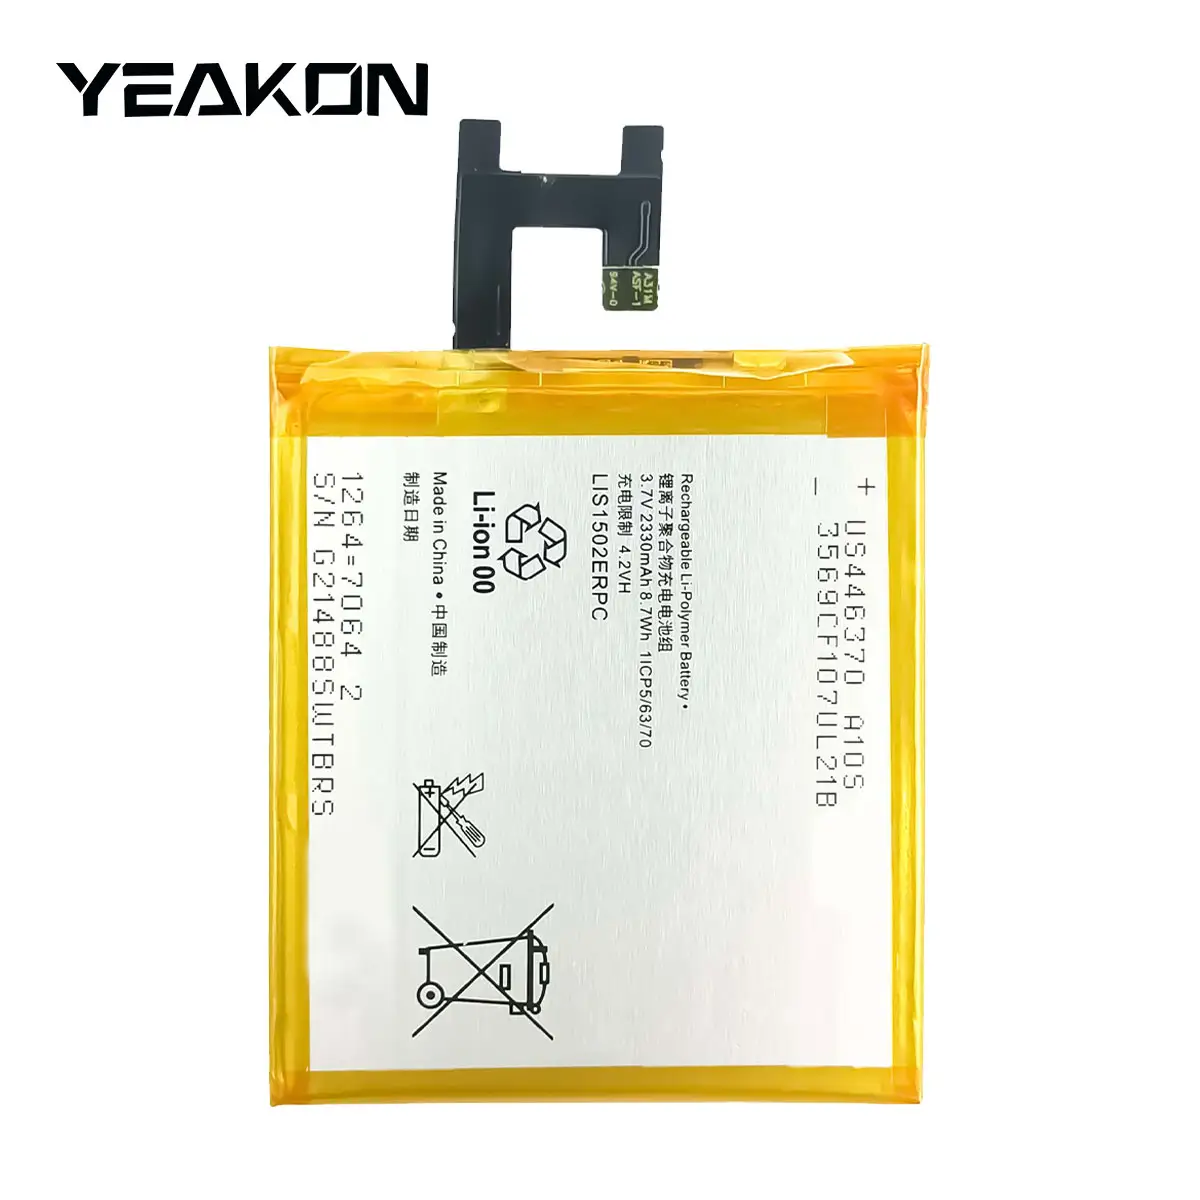 Full capacity replacement battery LIS1502ERPC for Sony Xperia Z/L36h/C6602/C6603 3.7V 2330mAh battery